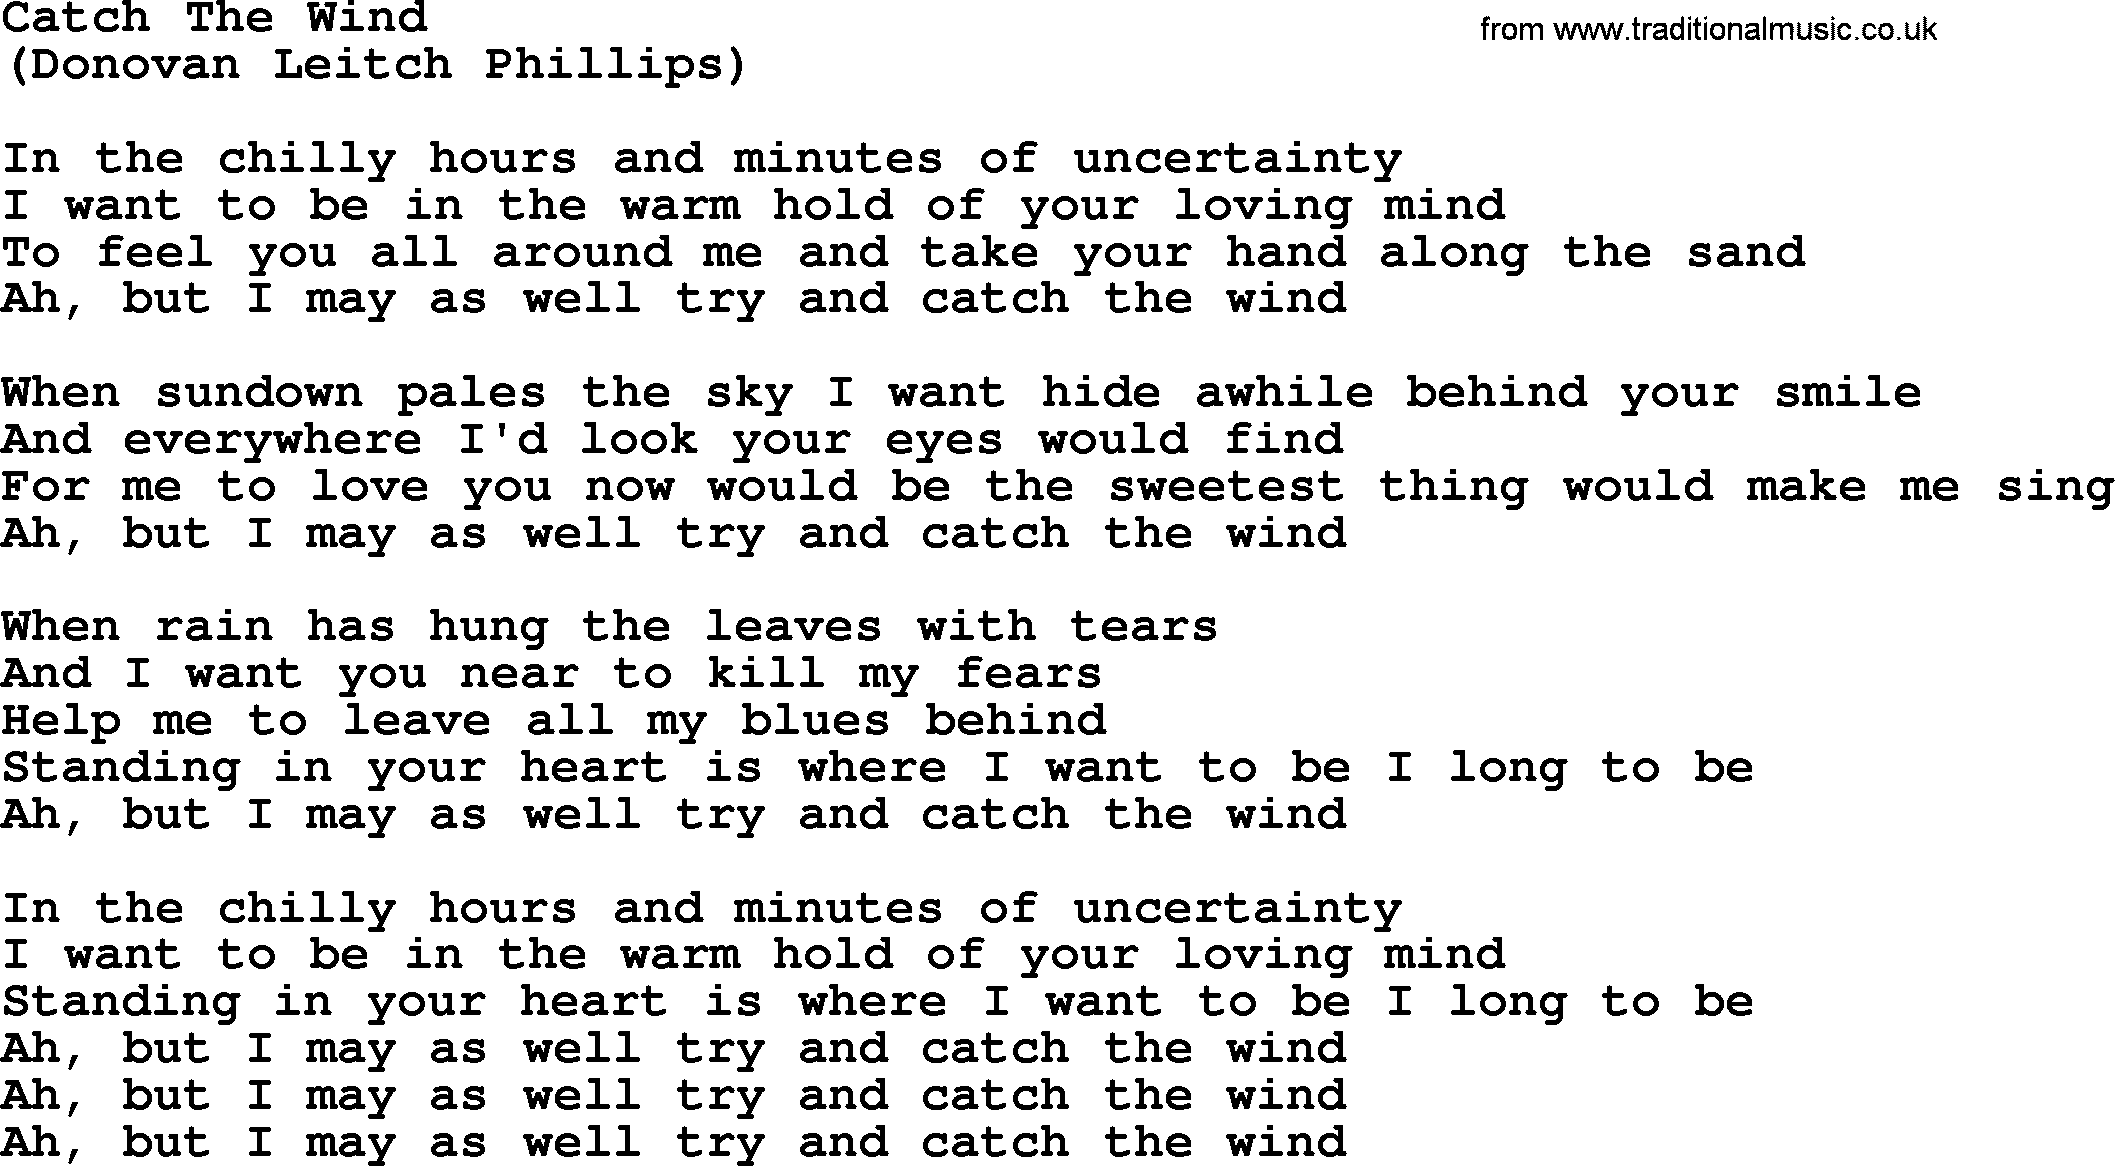 The Byrds song Catch The Wind, lyrics